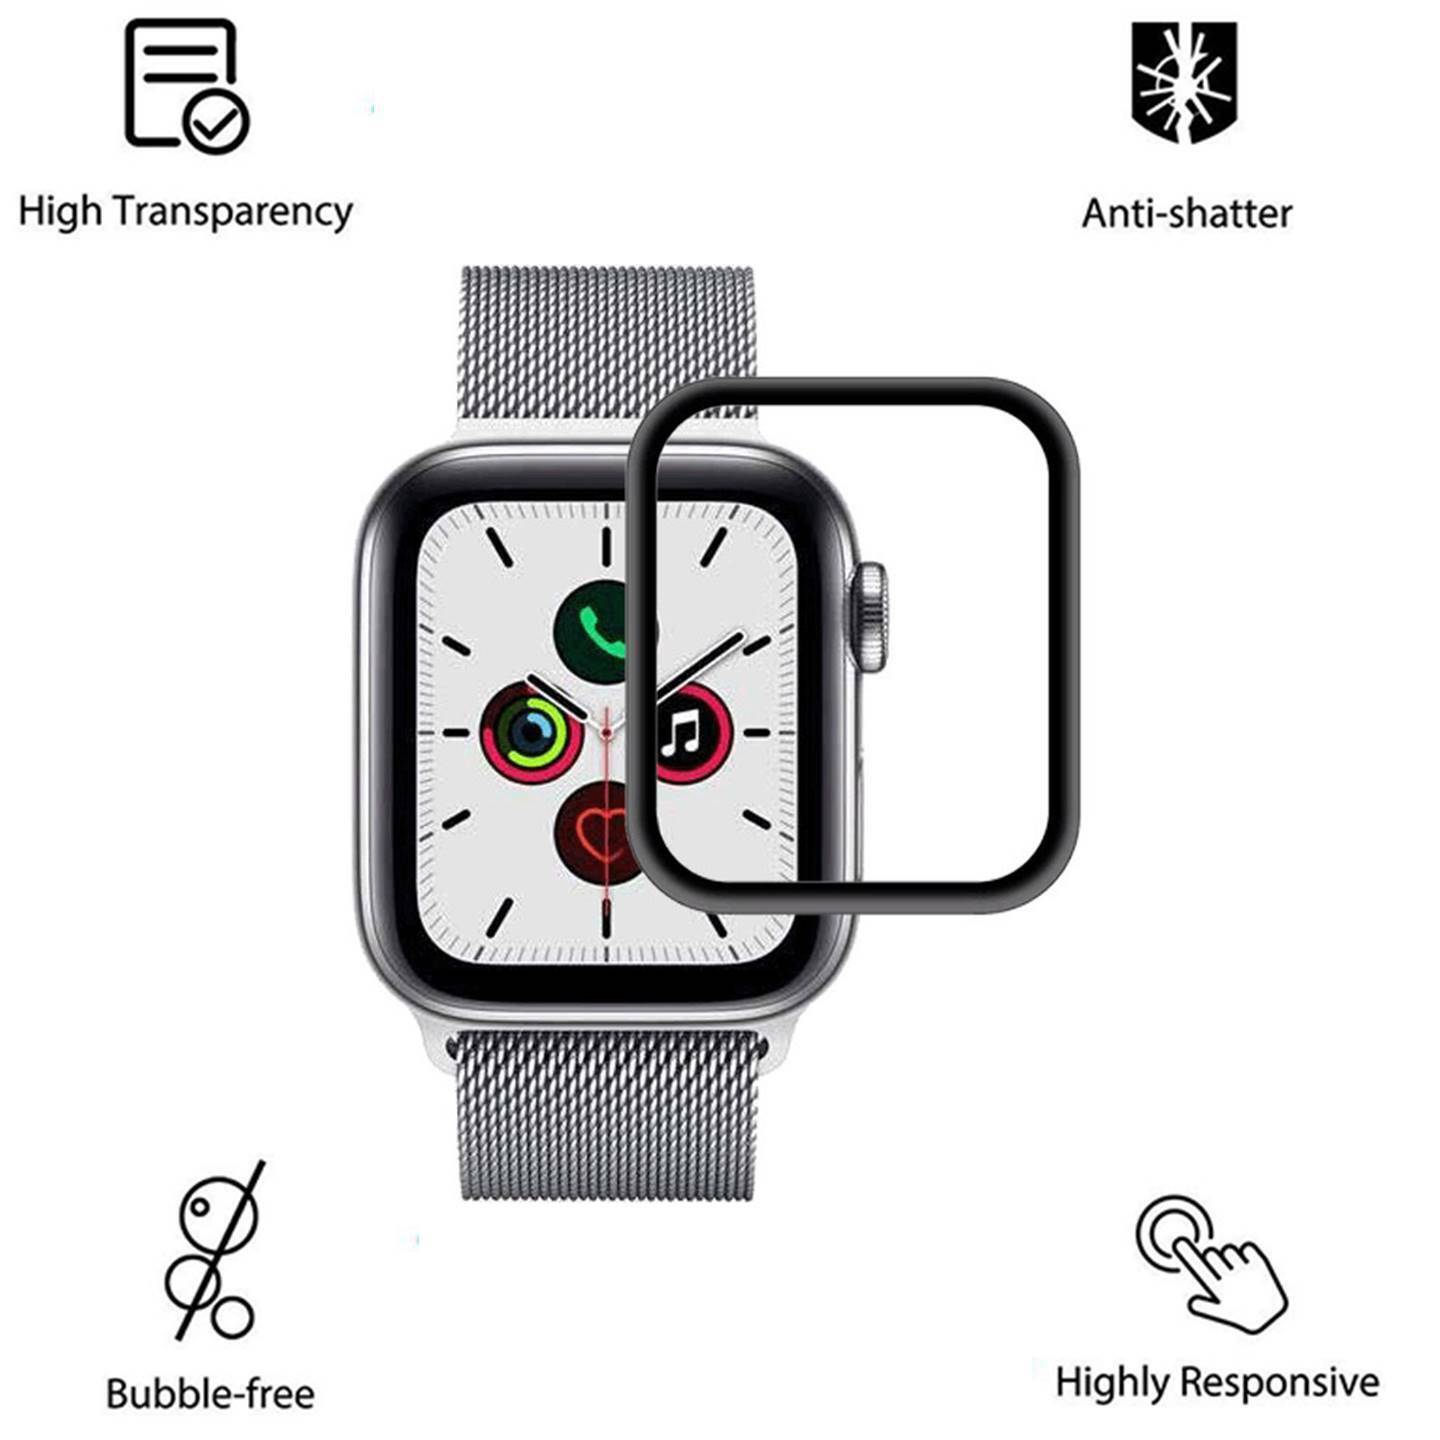 Tempered Glass Compatible with iWatch 42mm, Hard Protective Face Cover for iWatch 42mm